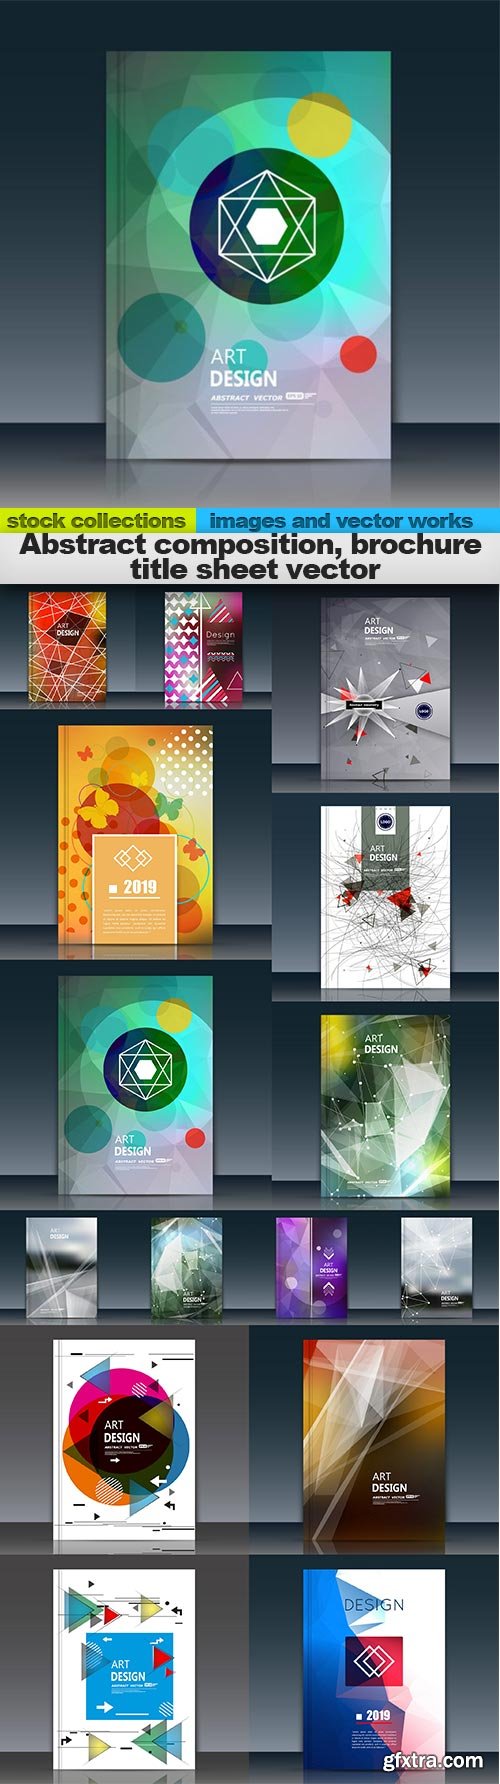 Abstract composition, brochure title sheet vector, 15 x EPS